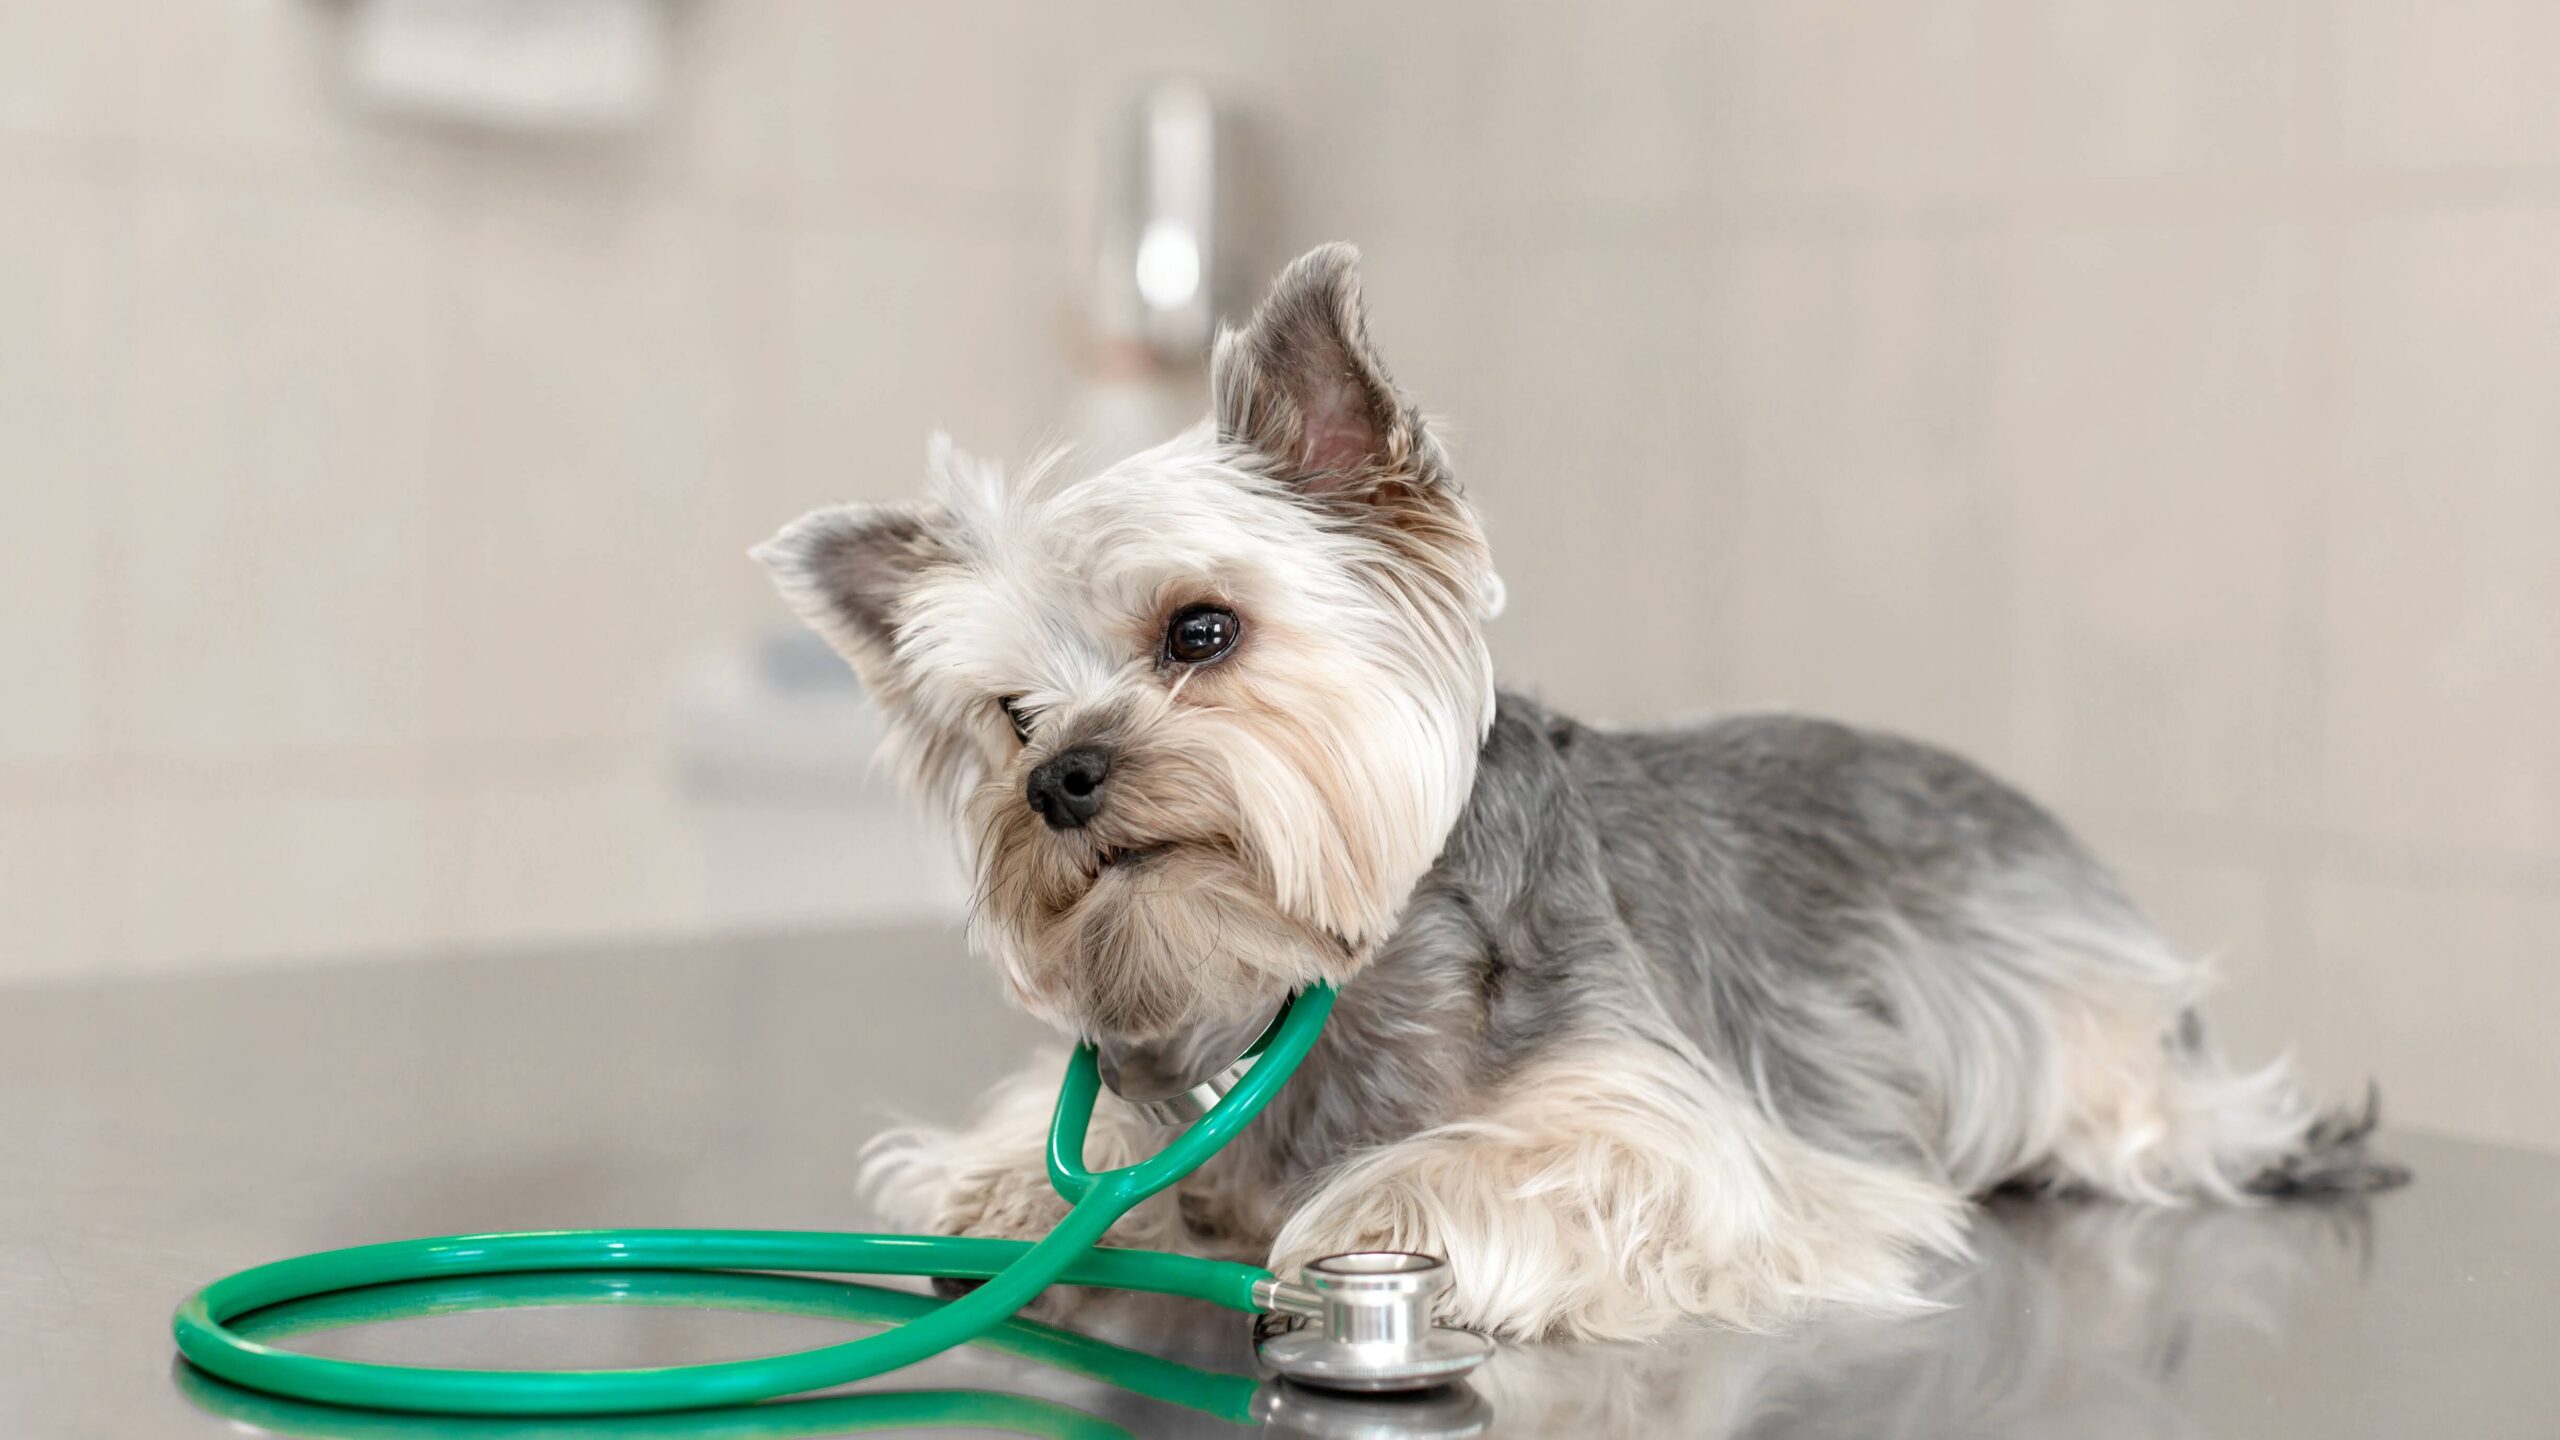 A cute dog breed Yorkshire Terrier is lying on the table with a stethoscope in a veterinary clinic. Inspection in a veterinary clinic. Happy dog vet. Blurred Background.